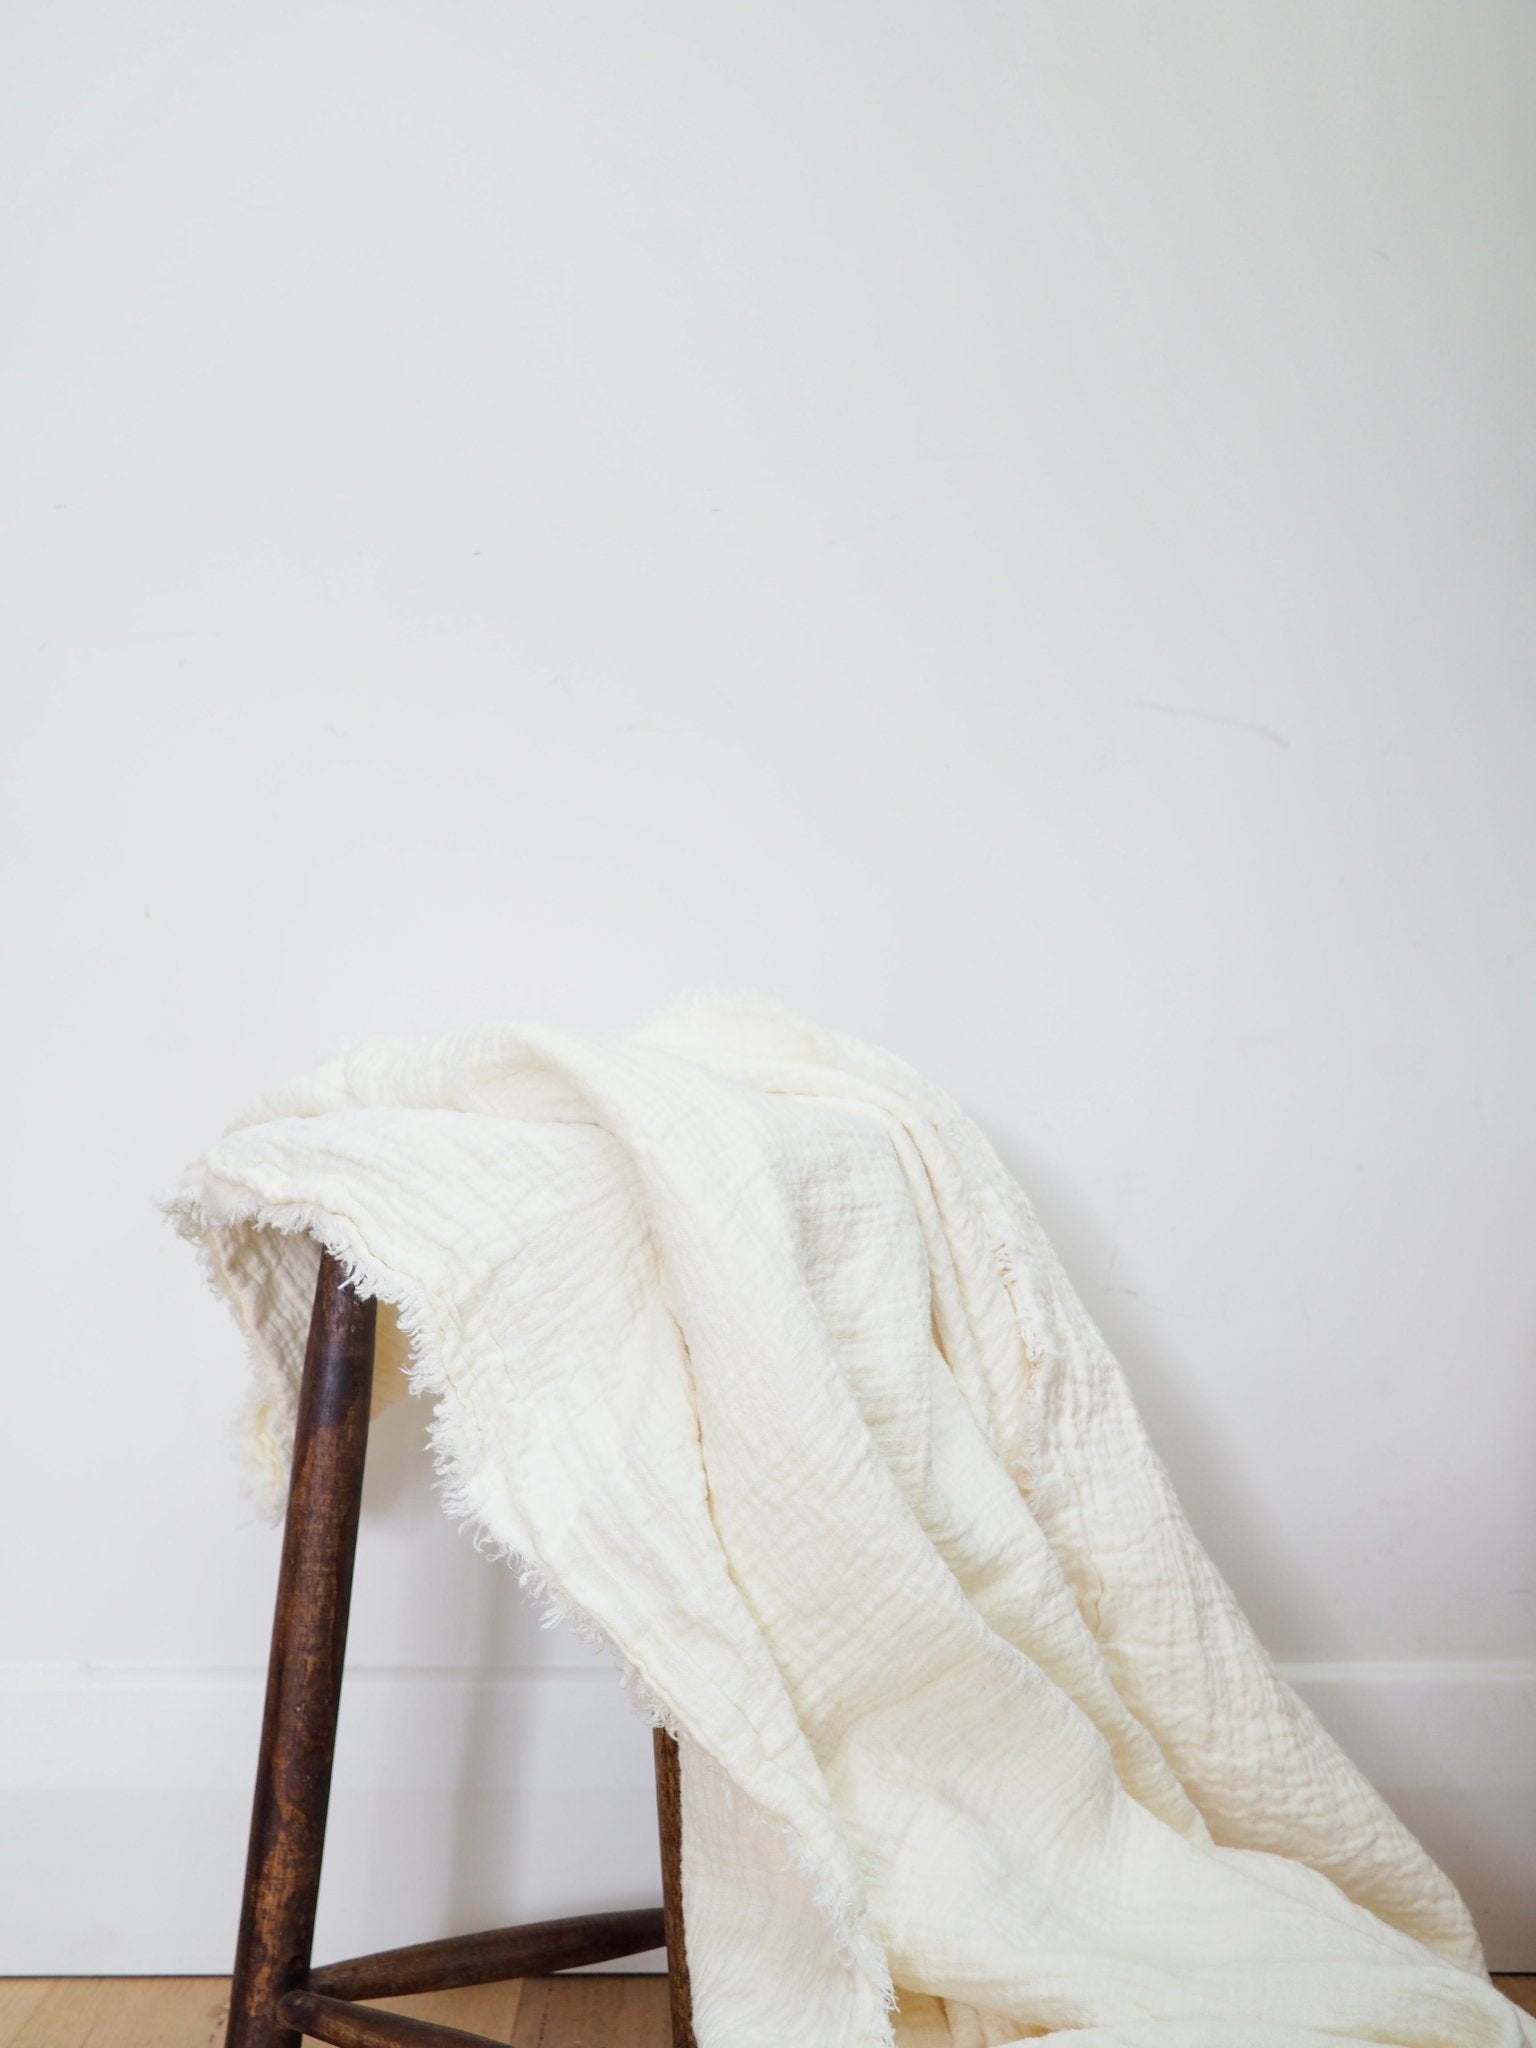 Heavyweight linen blanket in white flowing from a rustic stool to show its large length and fringed detailing.